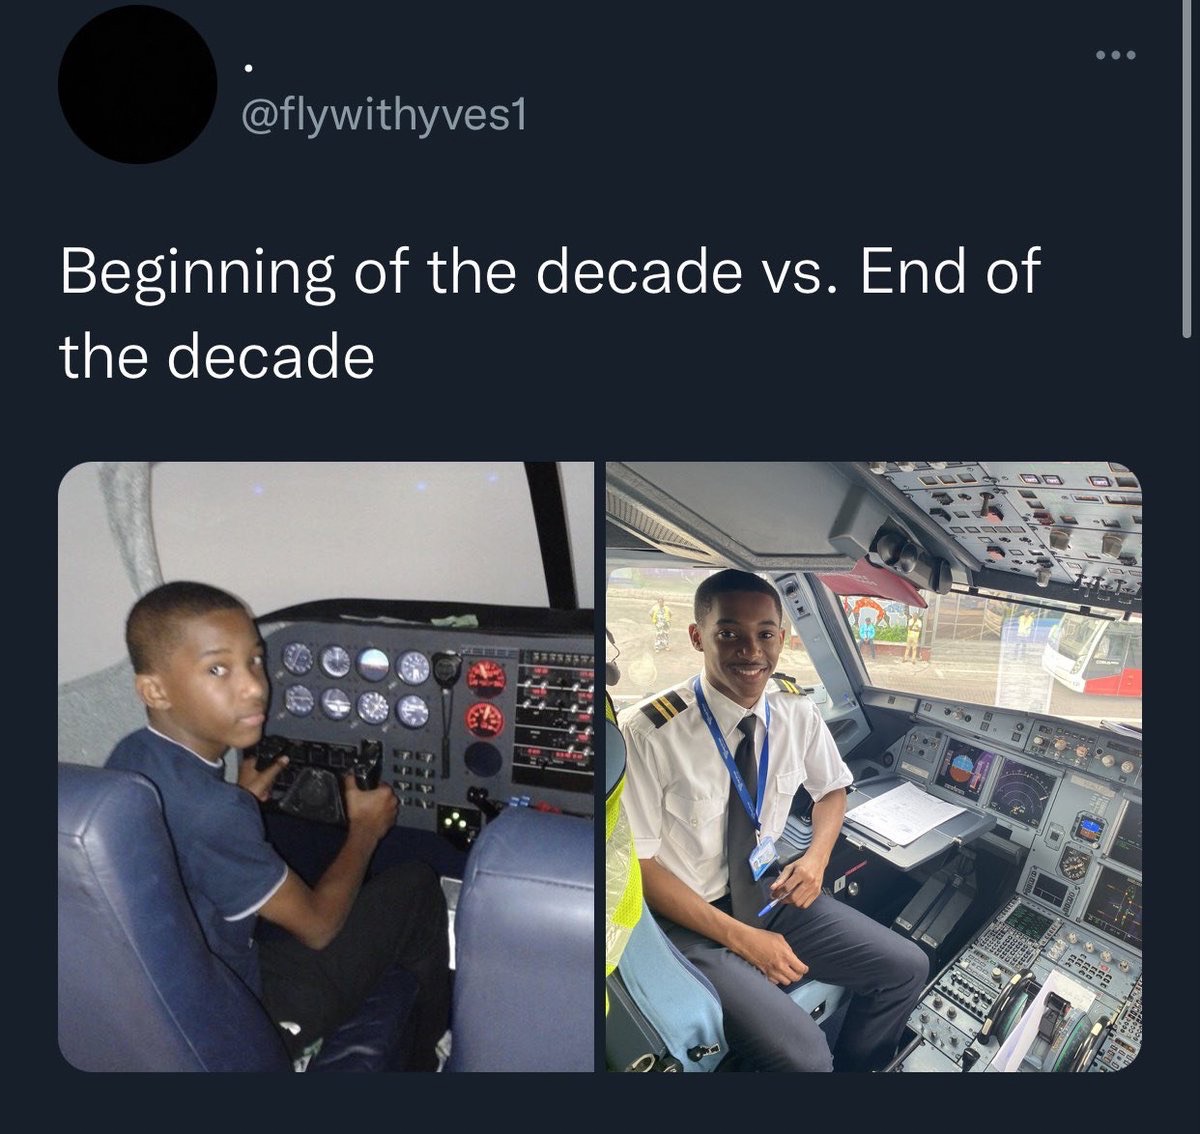 dudes post wins - airline pilot memes - Beginning of the decade vs. End of the decade Neno